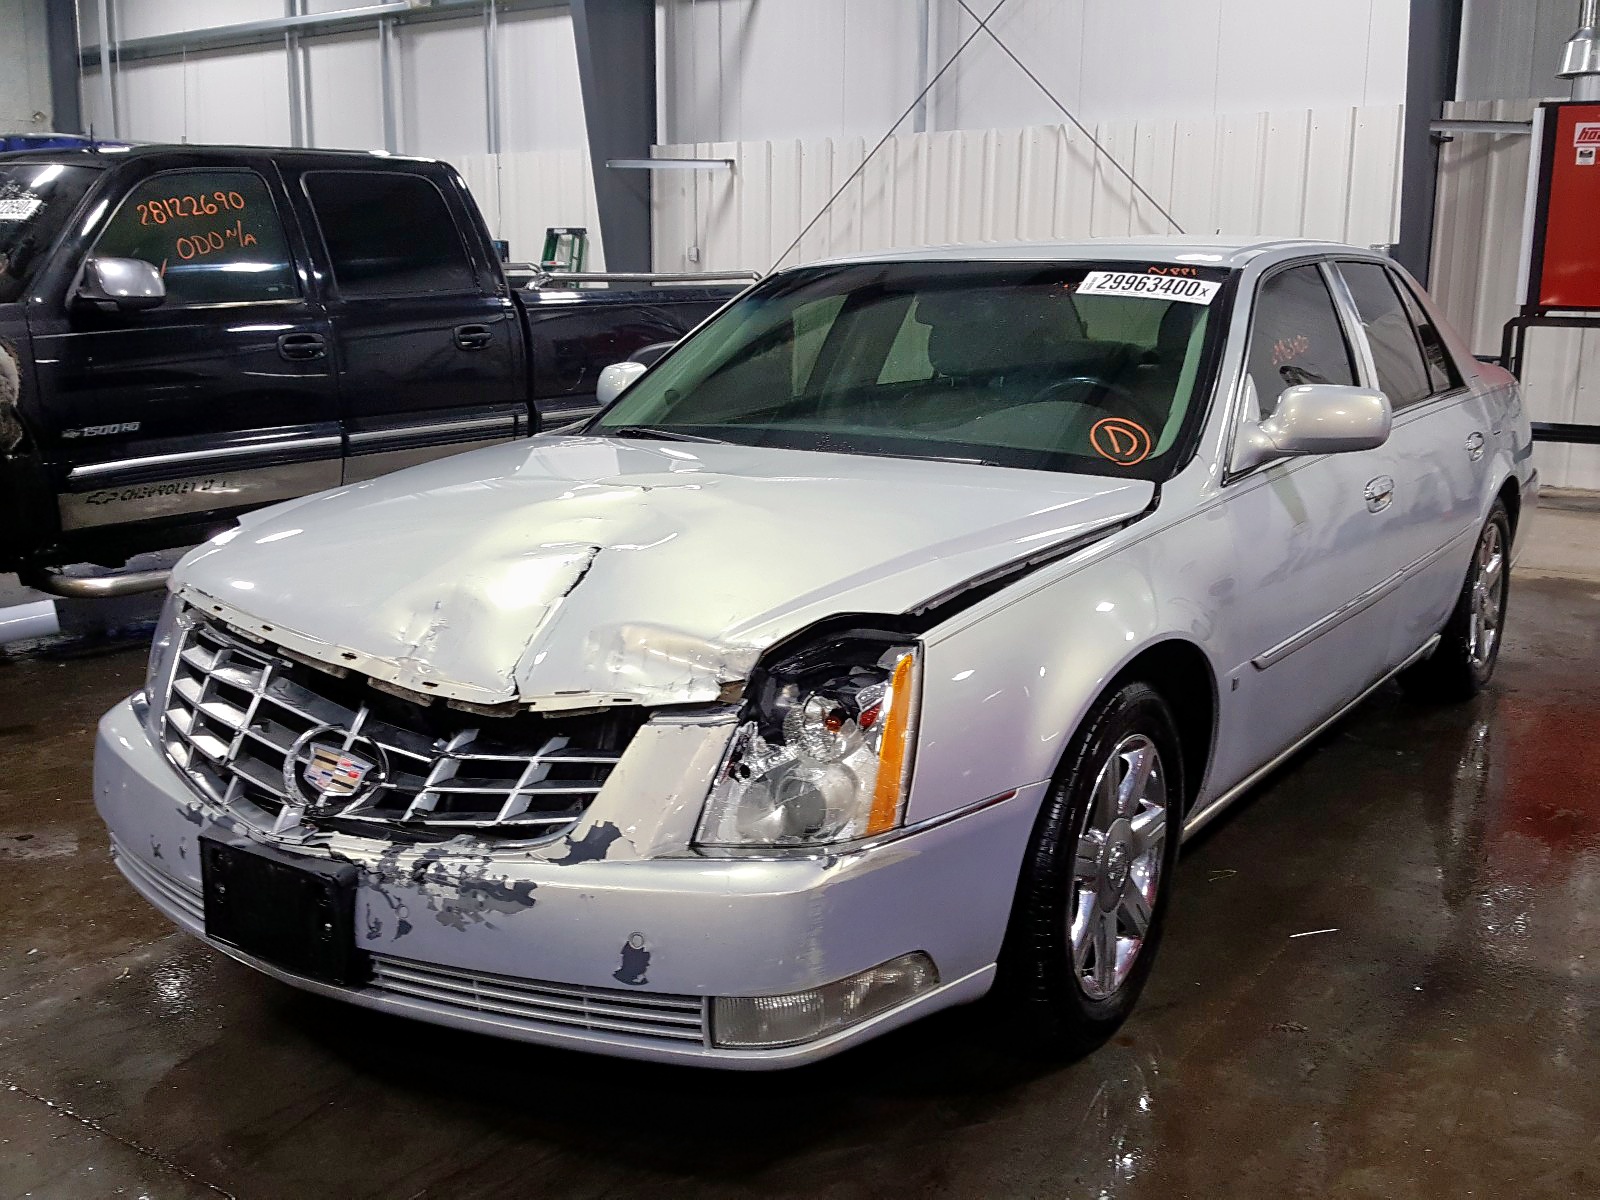 2007 Cadillac Dts 4.6L 8 in MN - St. Cloud (1G6KD57Y57U101790) for Sale ...